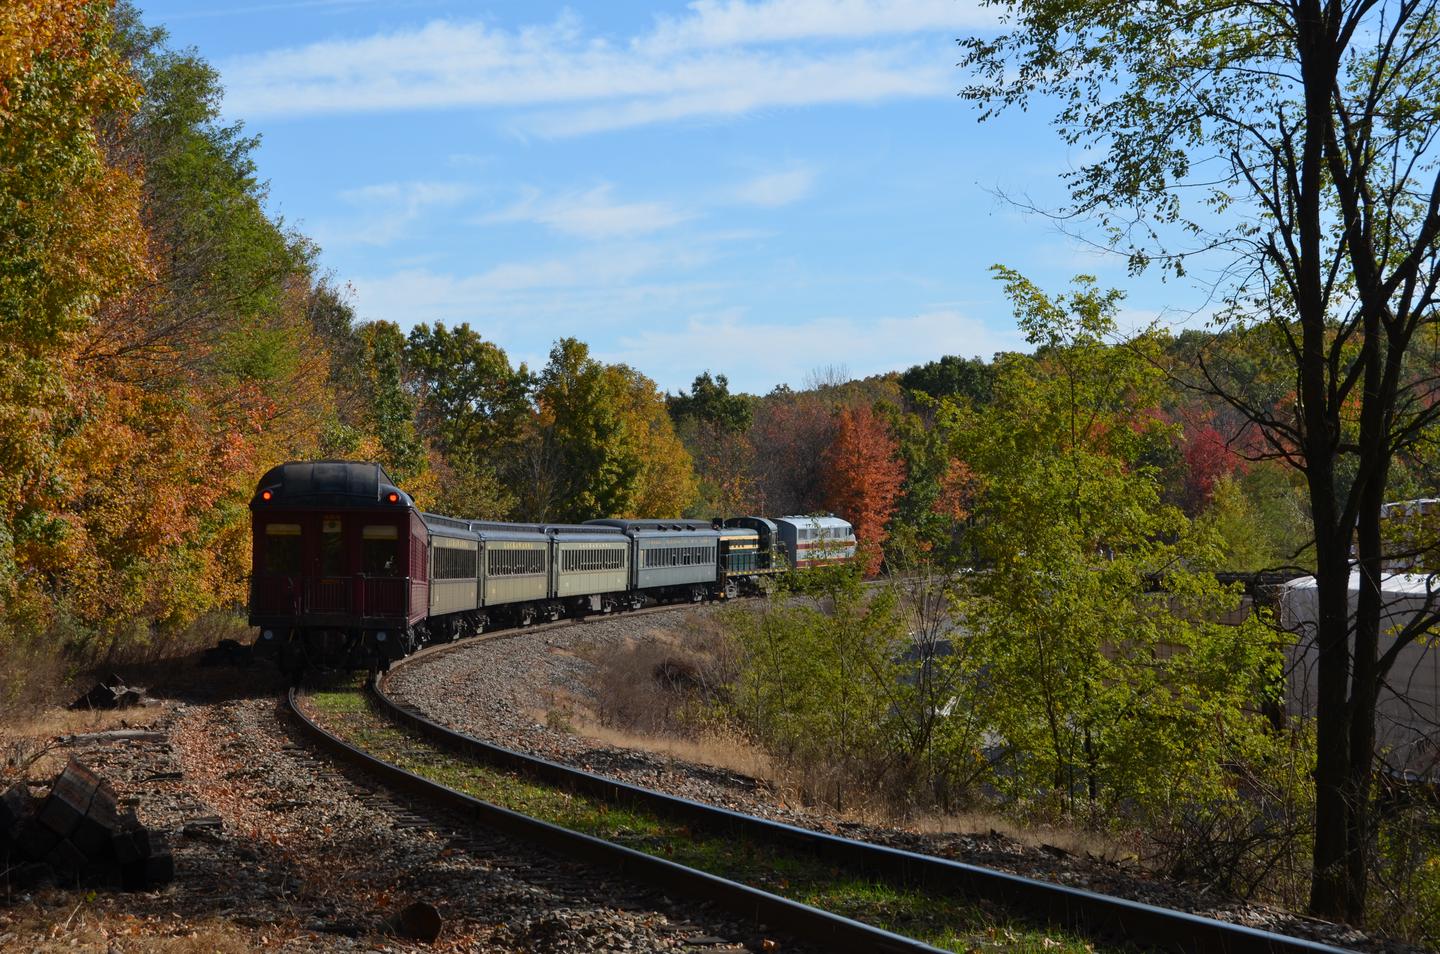 The image is that of a train pulling away.  There are two diesel electric engines and five passenger coaches.  train is surrounded by trees.  The leaves are in fall colors of red, orange, yellow, and green.  Train leaving Cresco Station.